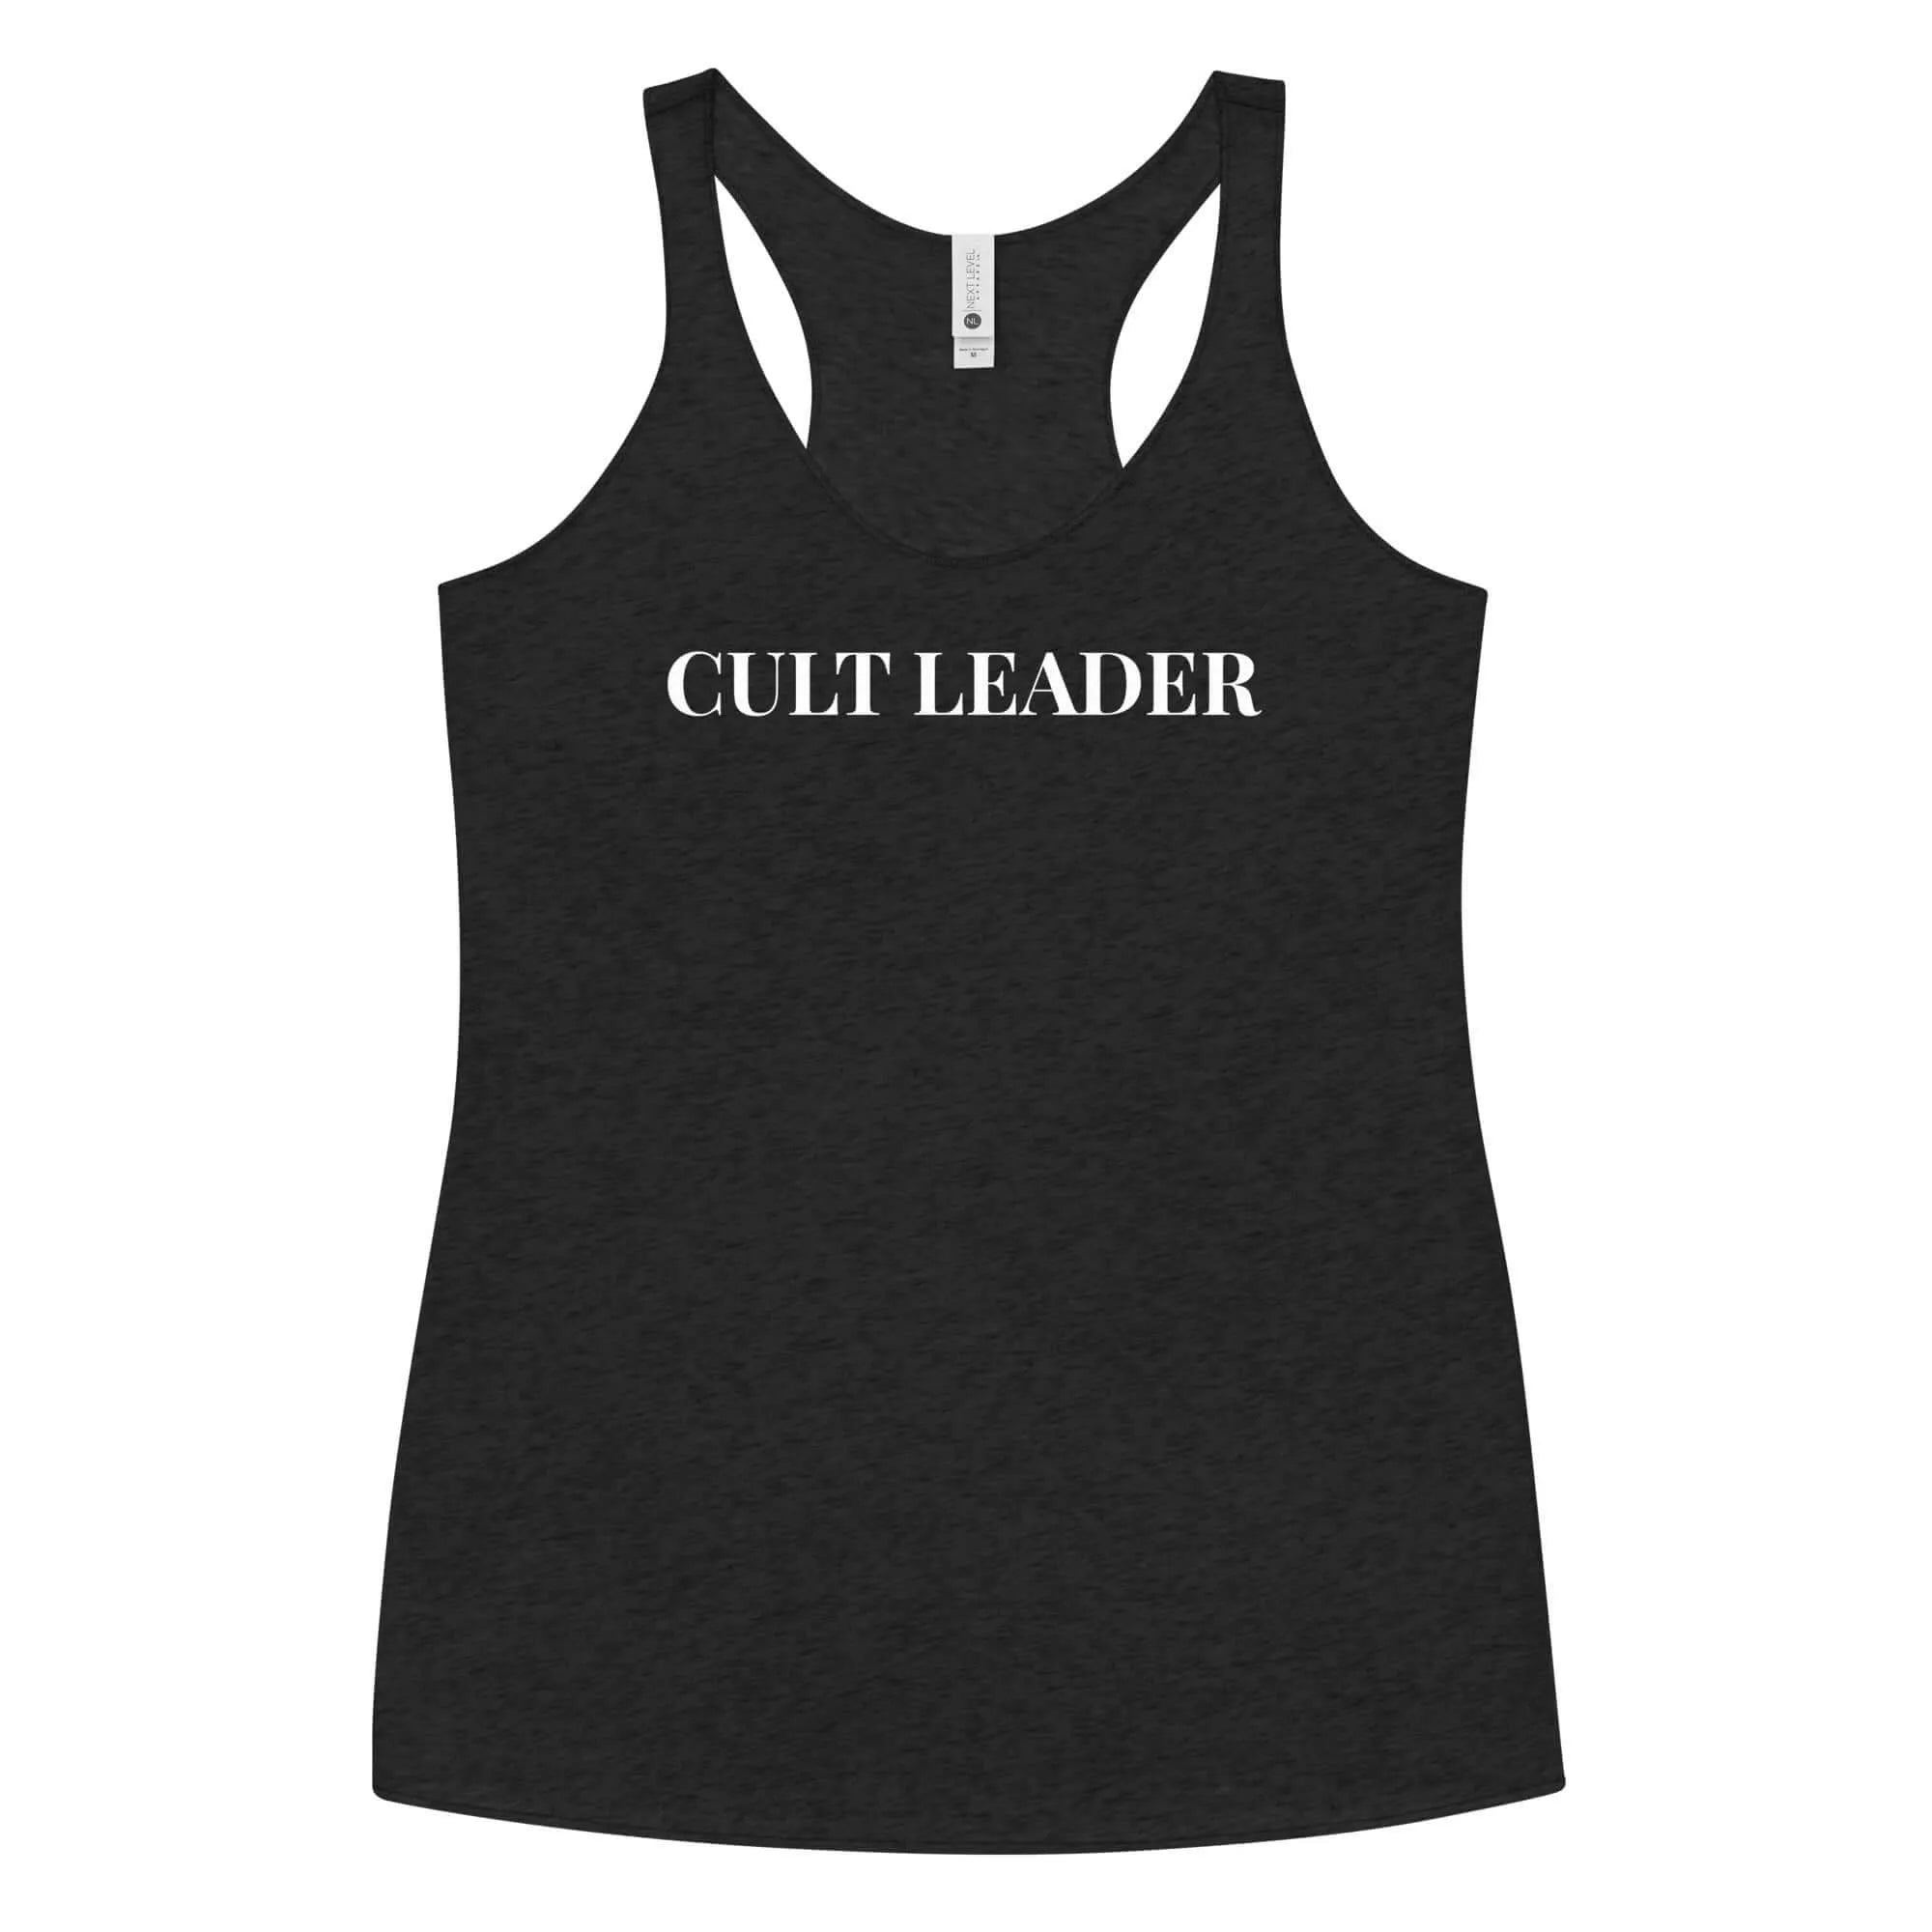 cult leader humorous graphic women's shirt racerback tank top small batch witch coven girl gang